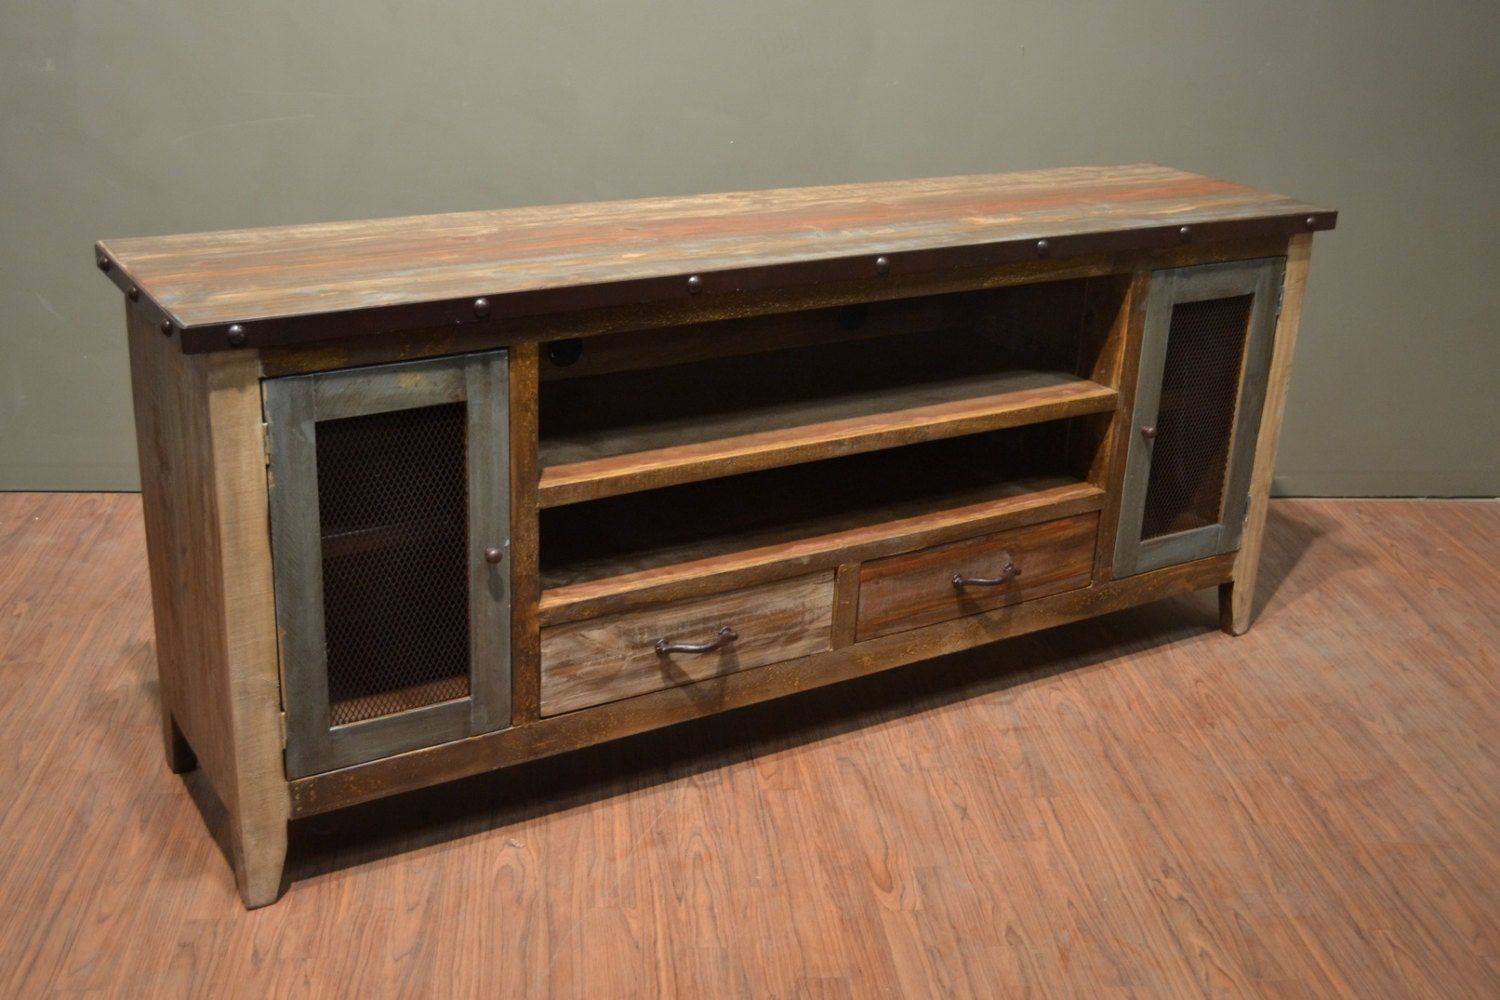 Industrial Rustic Reclaimed Wood 76 Inch Tv Stand Media Intended For Rustic Country Tv Stands In Weathered Pine Finish (View 2 of 15)